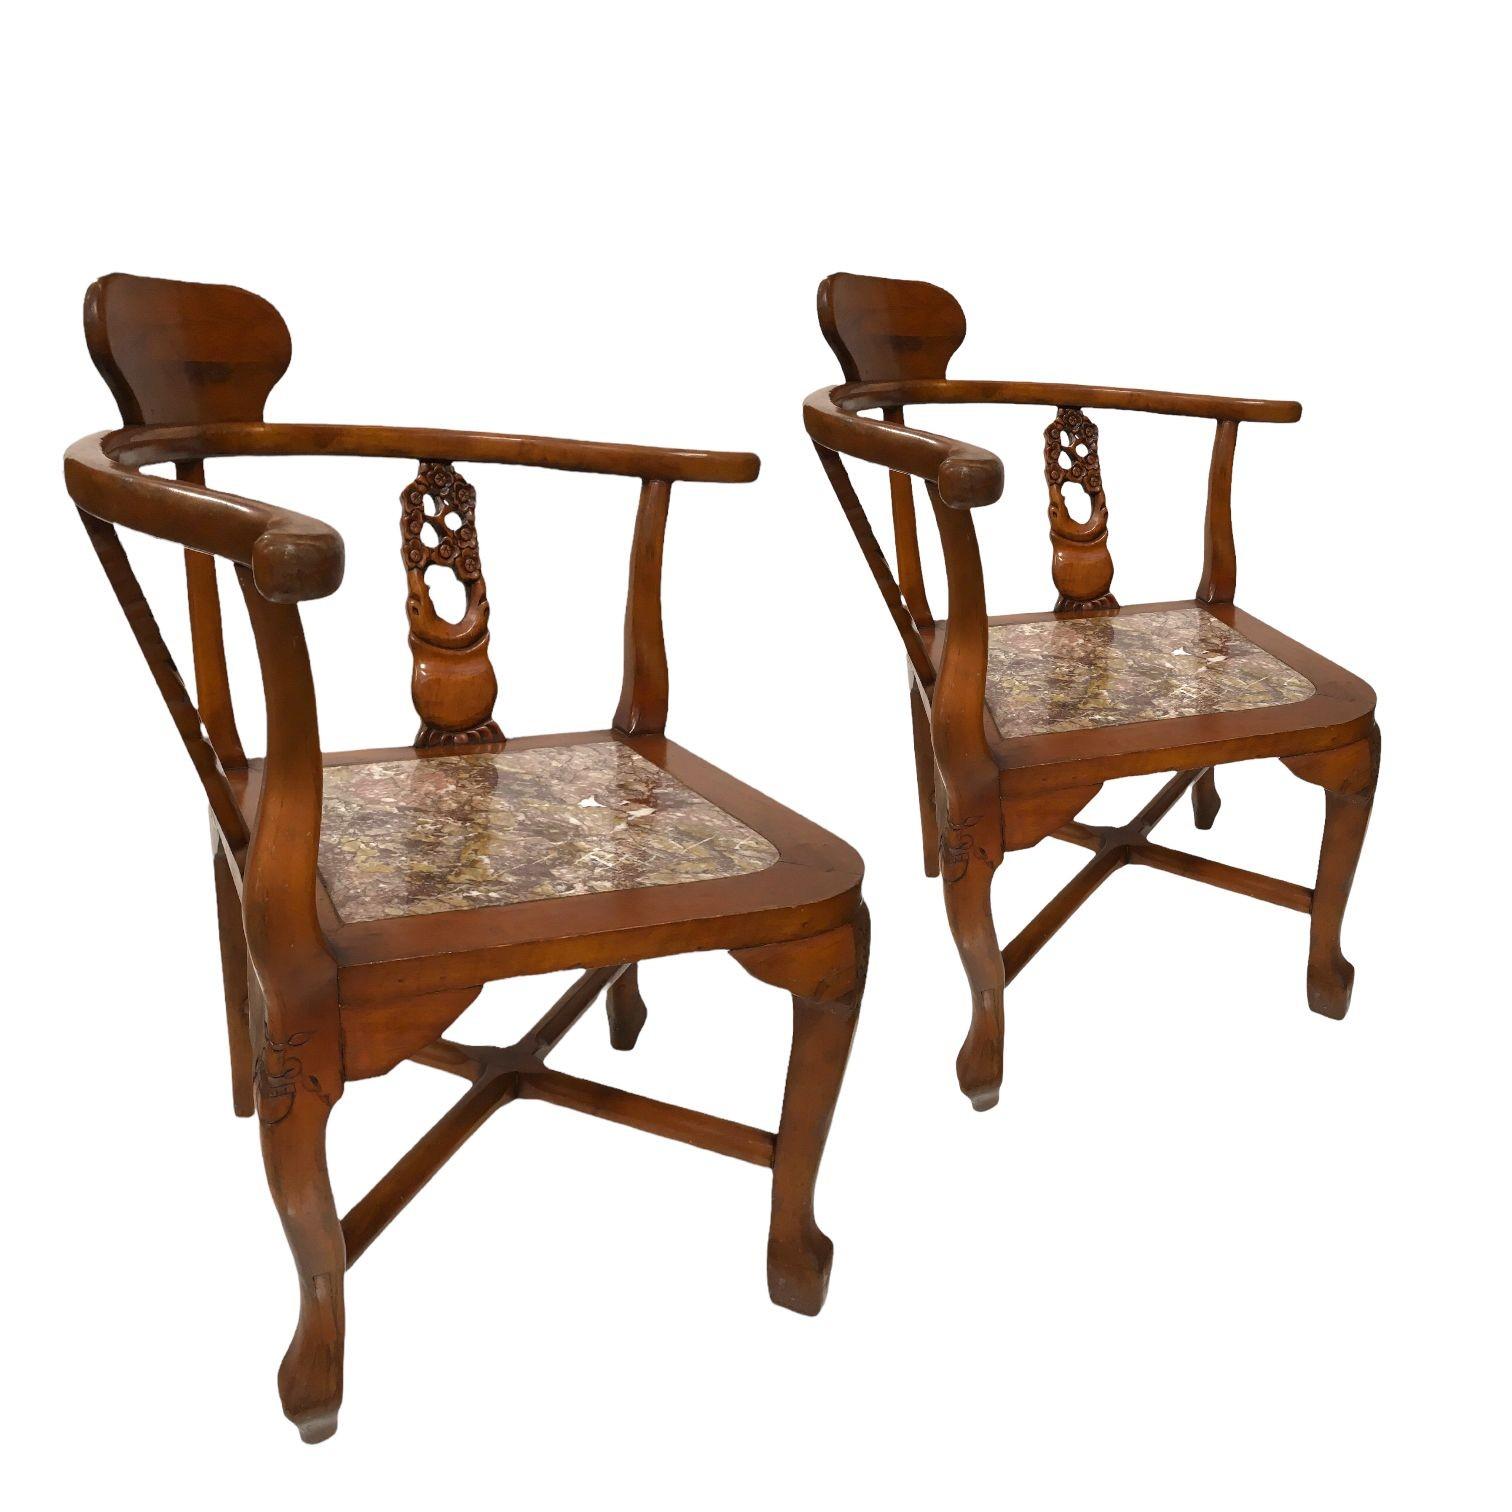 Chinoiserie Chinese-inspired Mid-century Rosewood Horseshoe Corner Chairs with Marble Seats designed by James Mount. These beautiful solid maple wood corner set of 2 chairs with gorgeous carvings along the seat back and legs with an inlaid marble